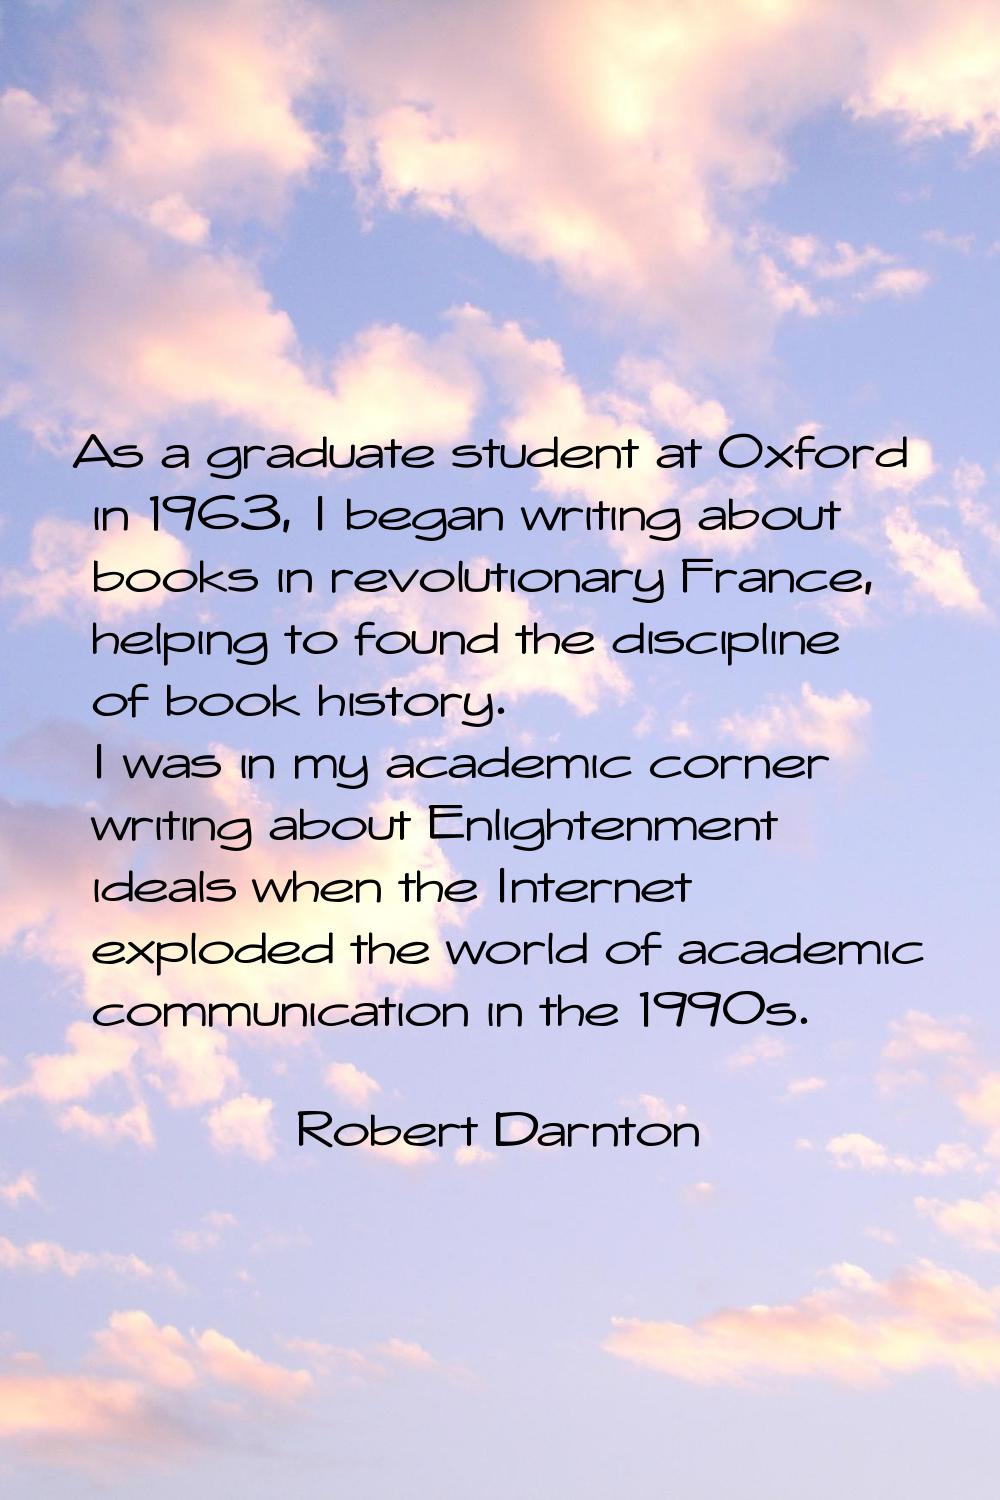 As a graduate student at Oxford in 1963, I began writing about books in revolutionary France, helpi